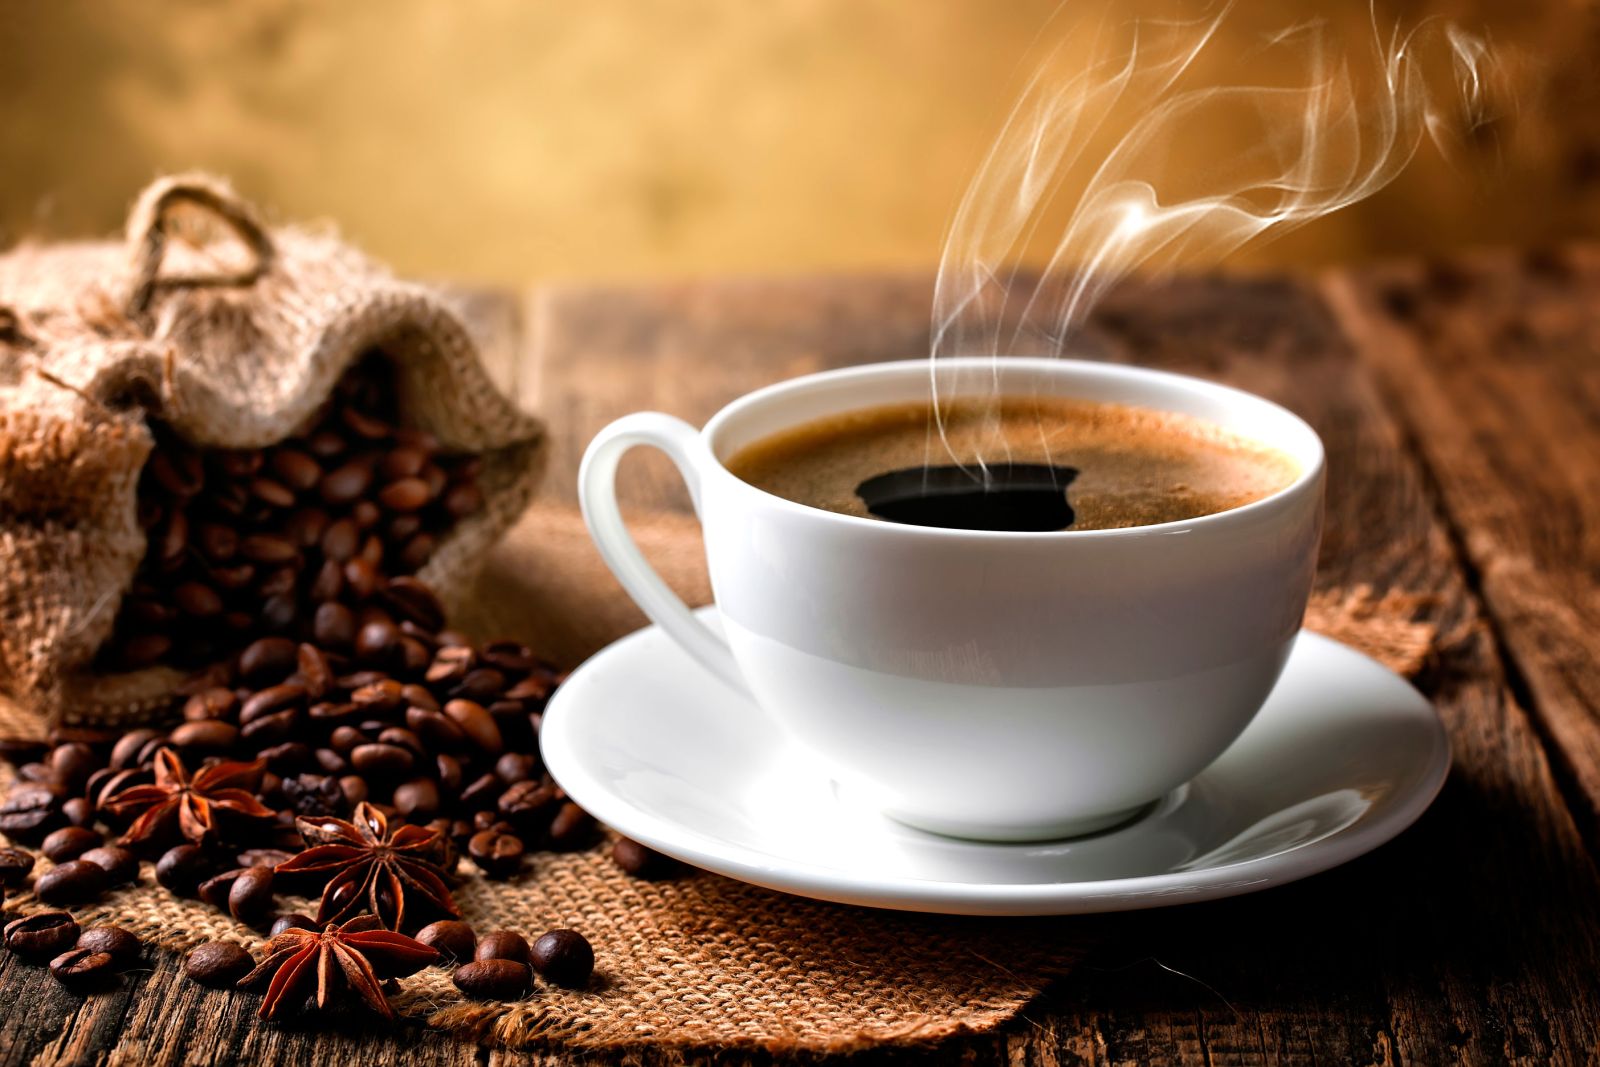 Coffee can control long-term weight by burning fat in the body